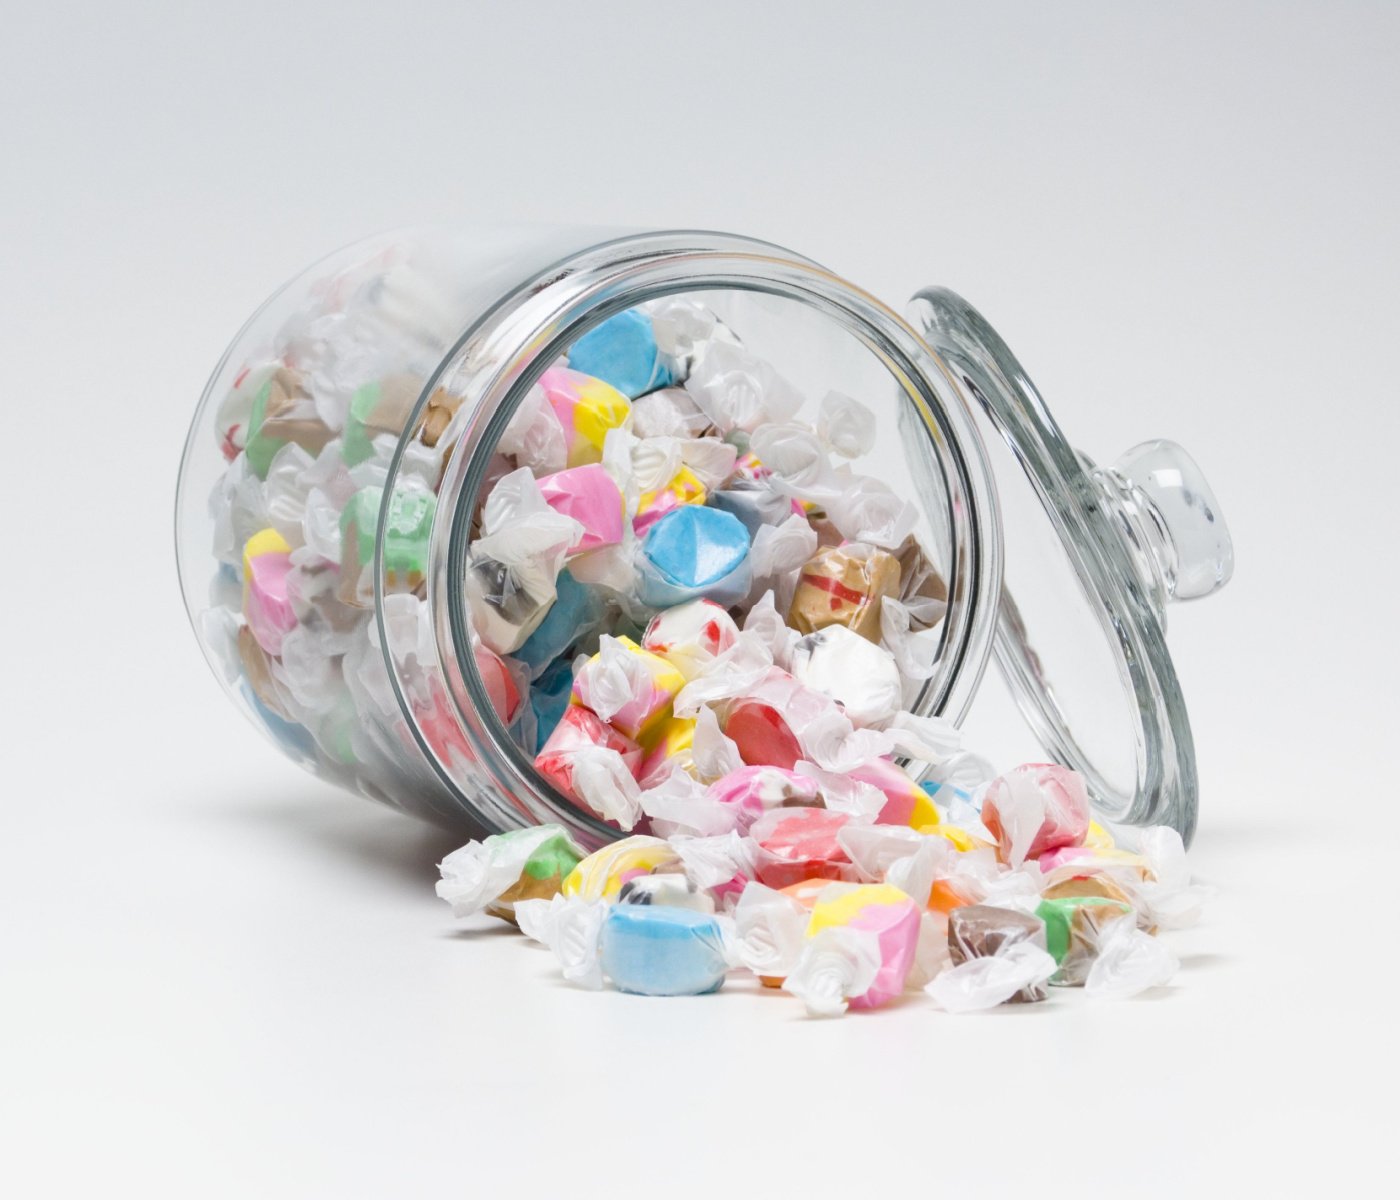 saltwater taffy spilling out of glass jar